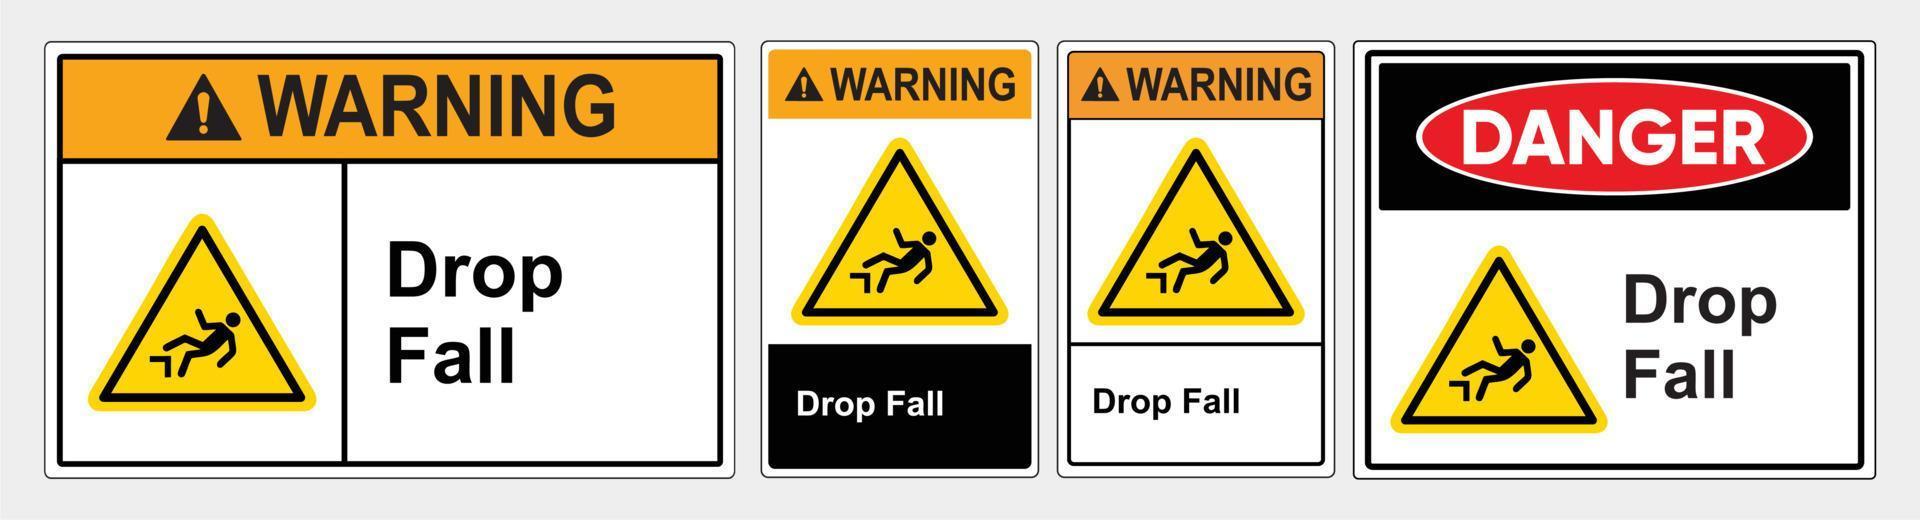 Crushing of hand sign. warning caution board. Safety sign Vector Illustration.